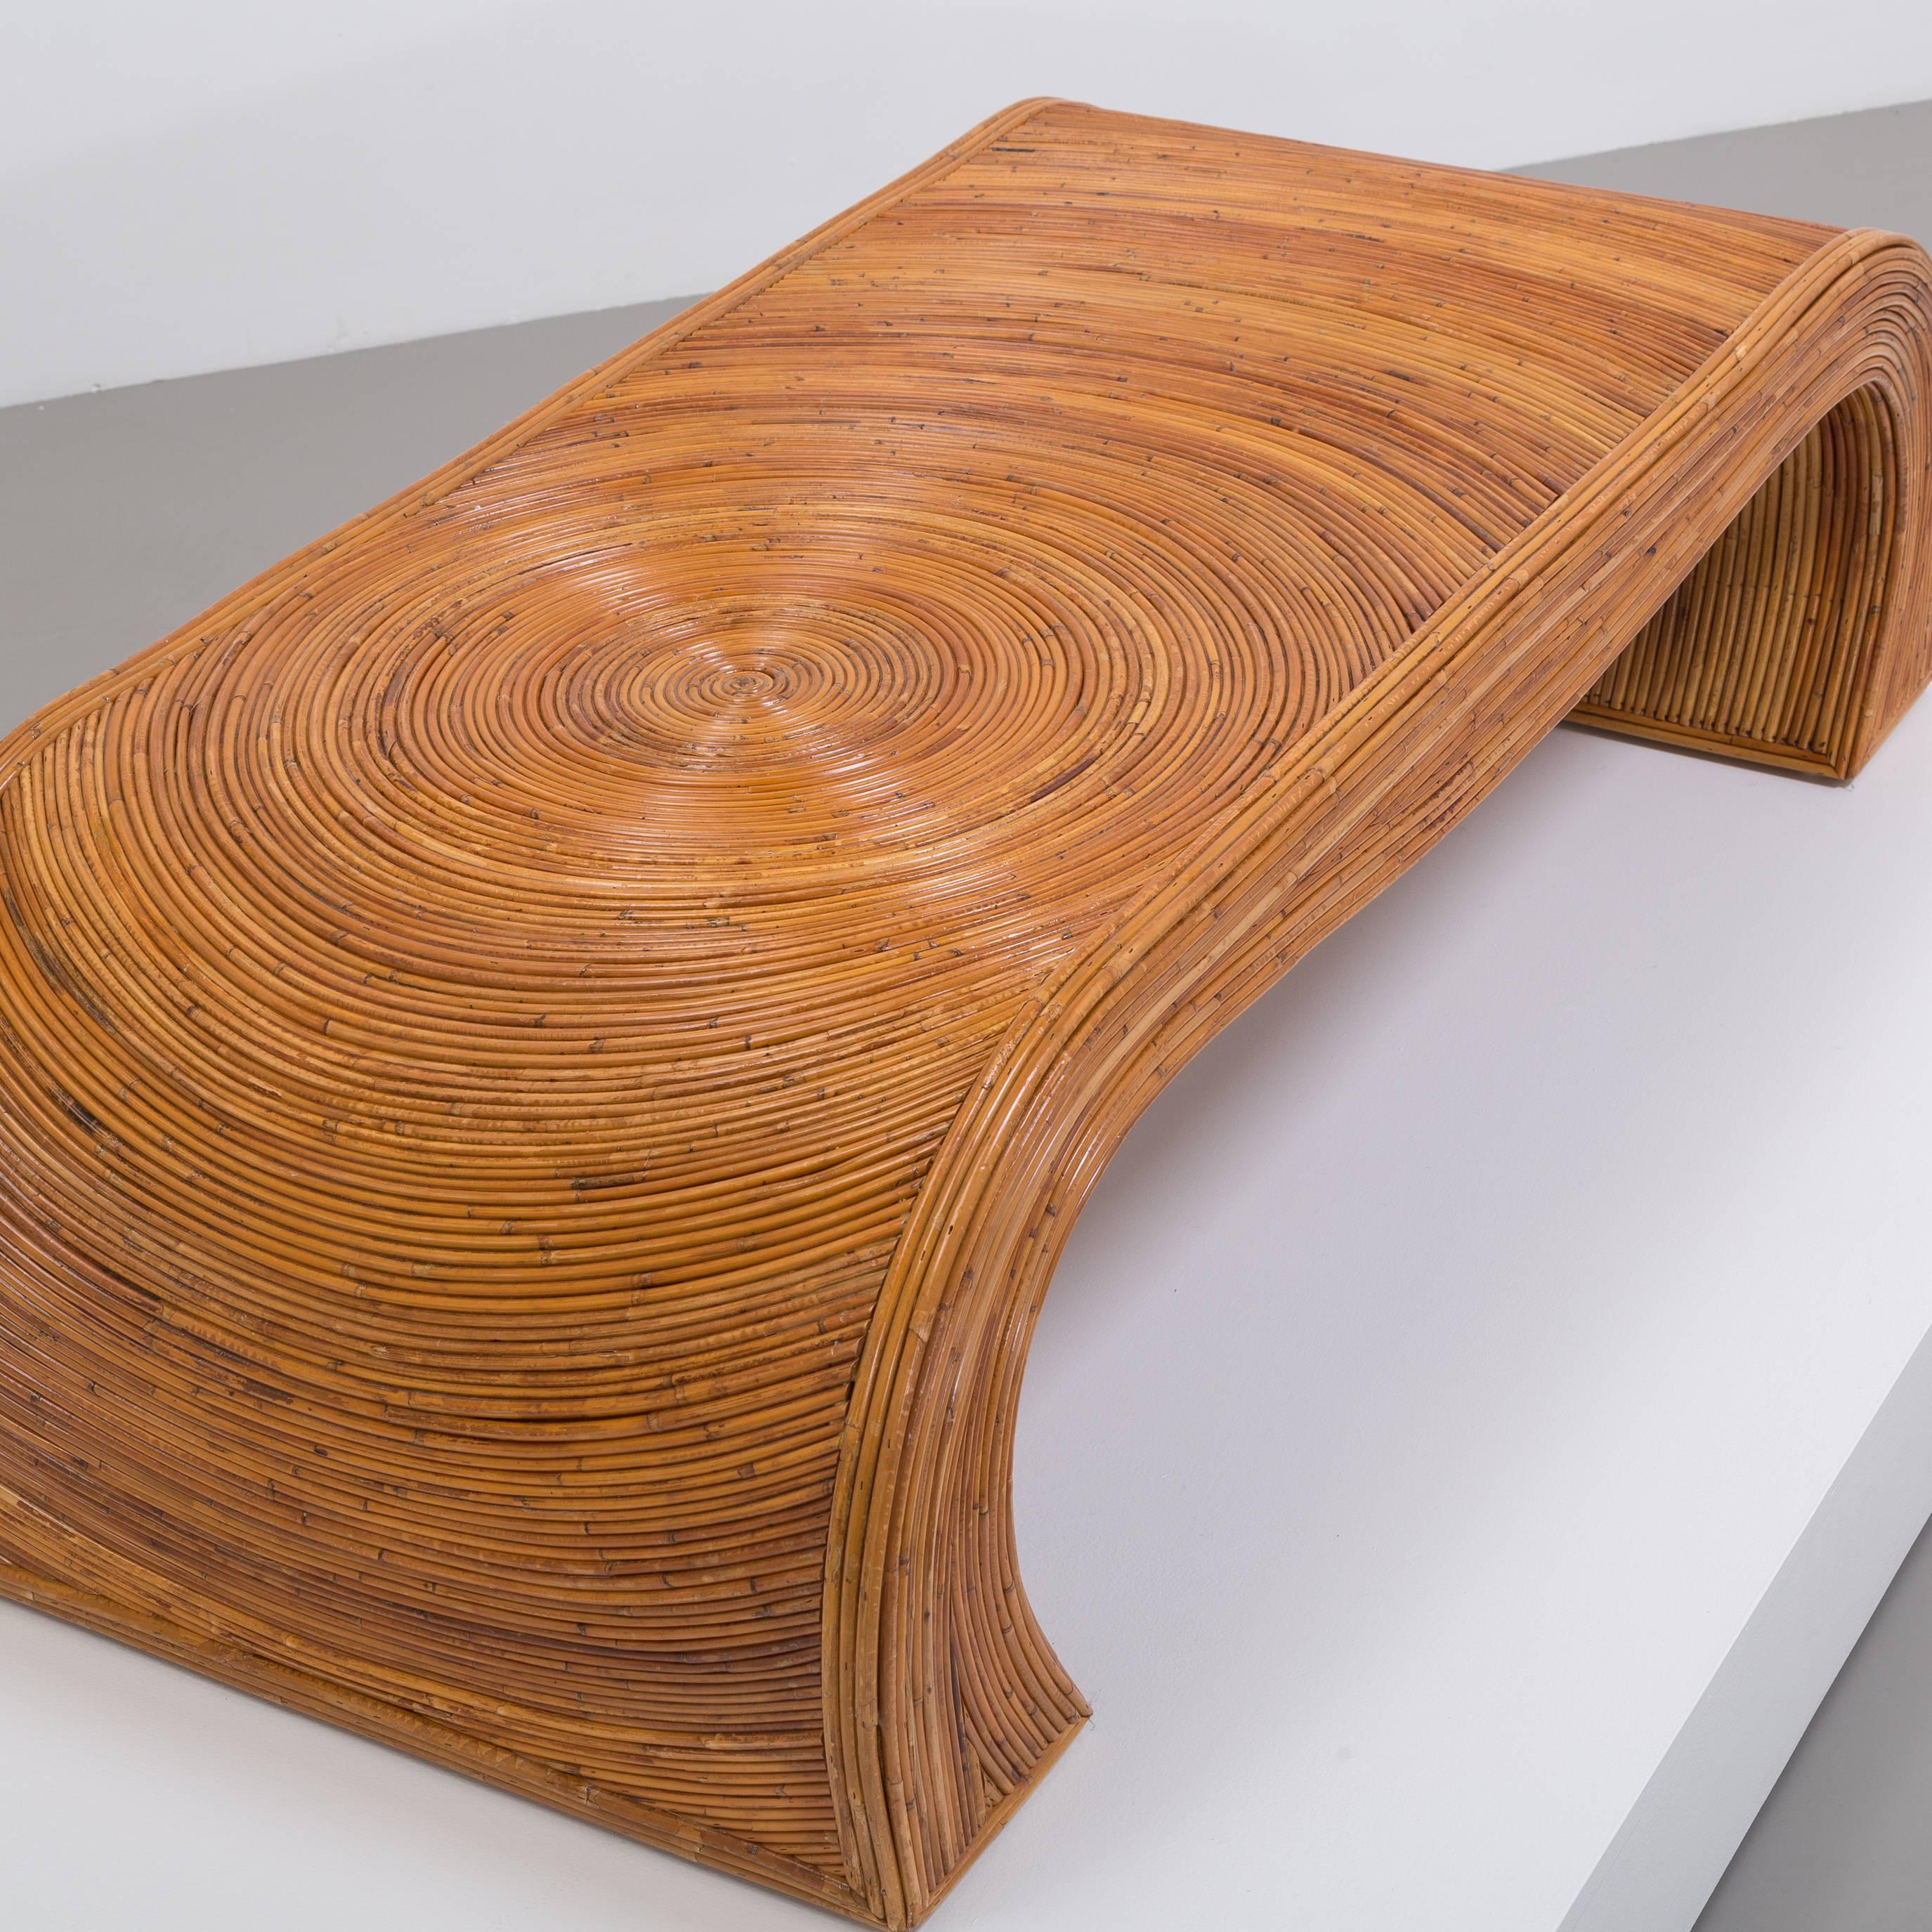 Gabriella Crespi Attributed Waterfall Bamboo Coffee Table, 1970s In Good Condition In London, GB